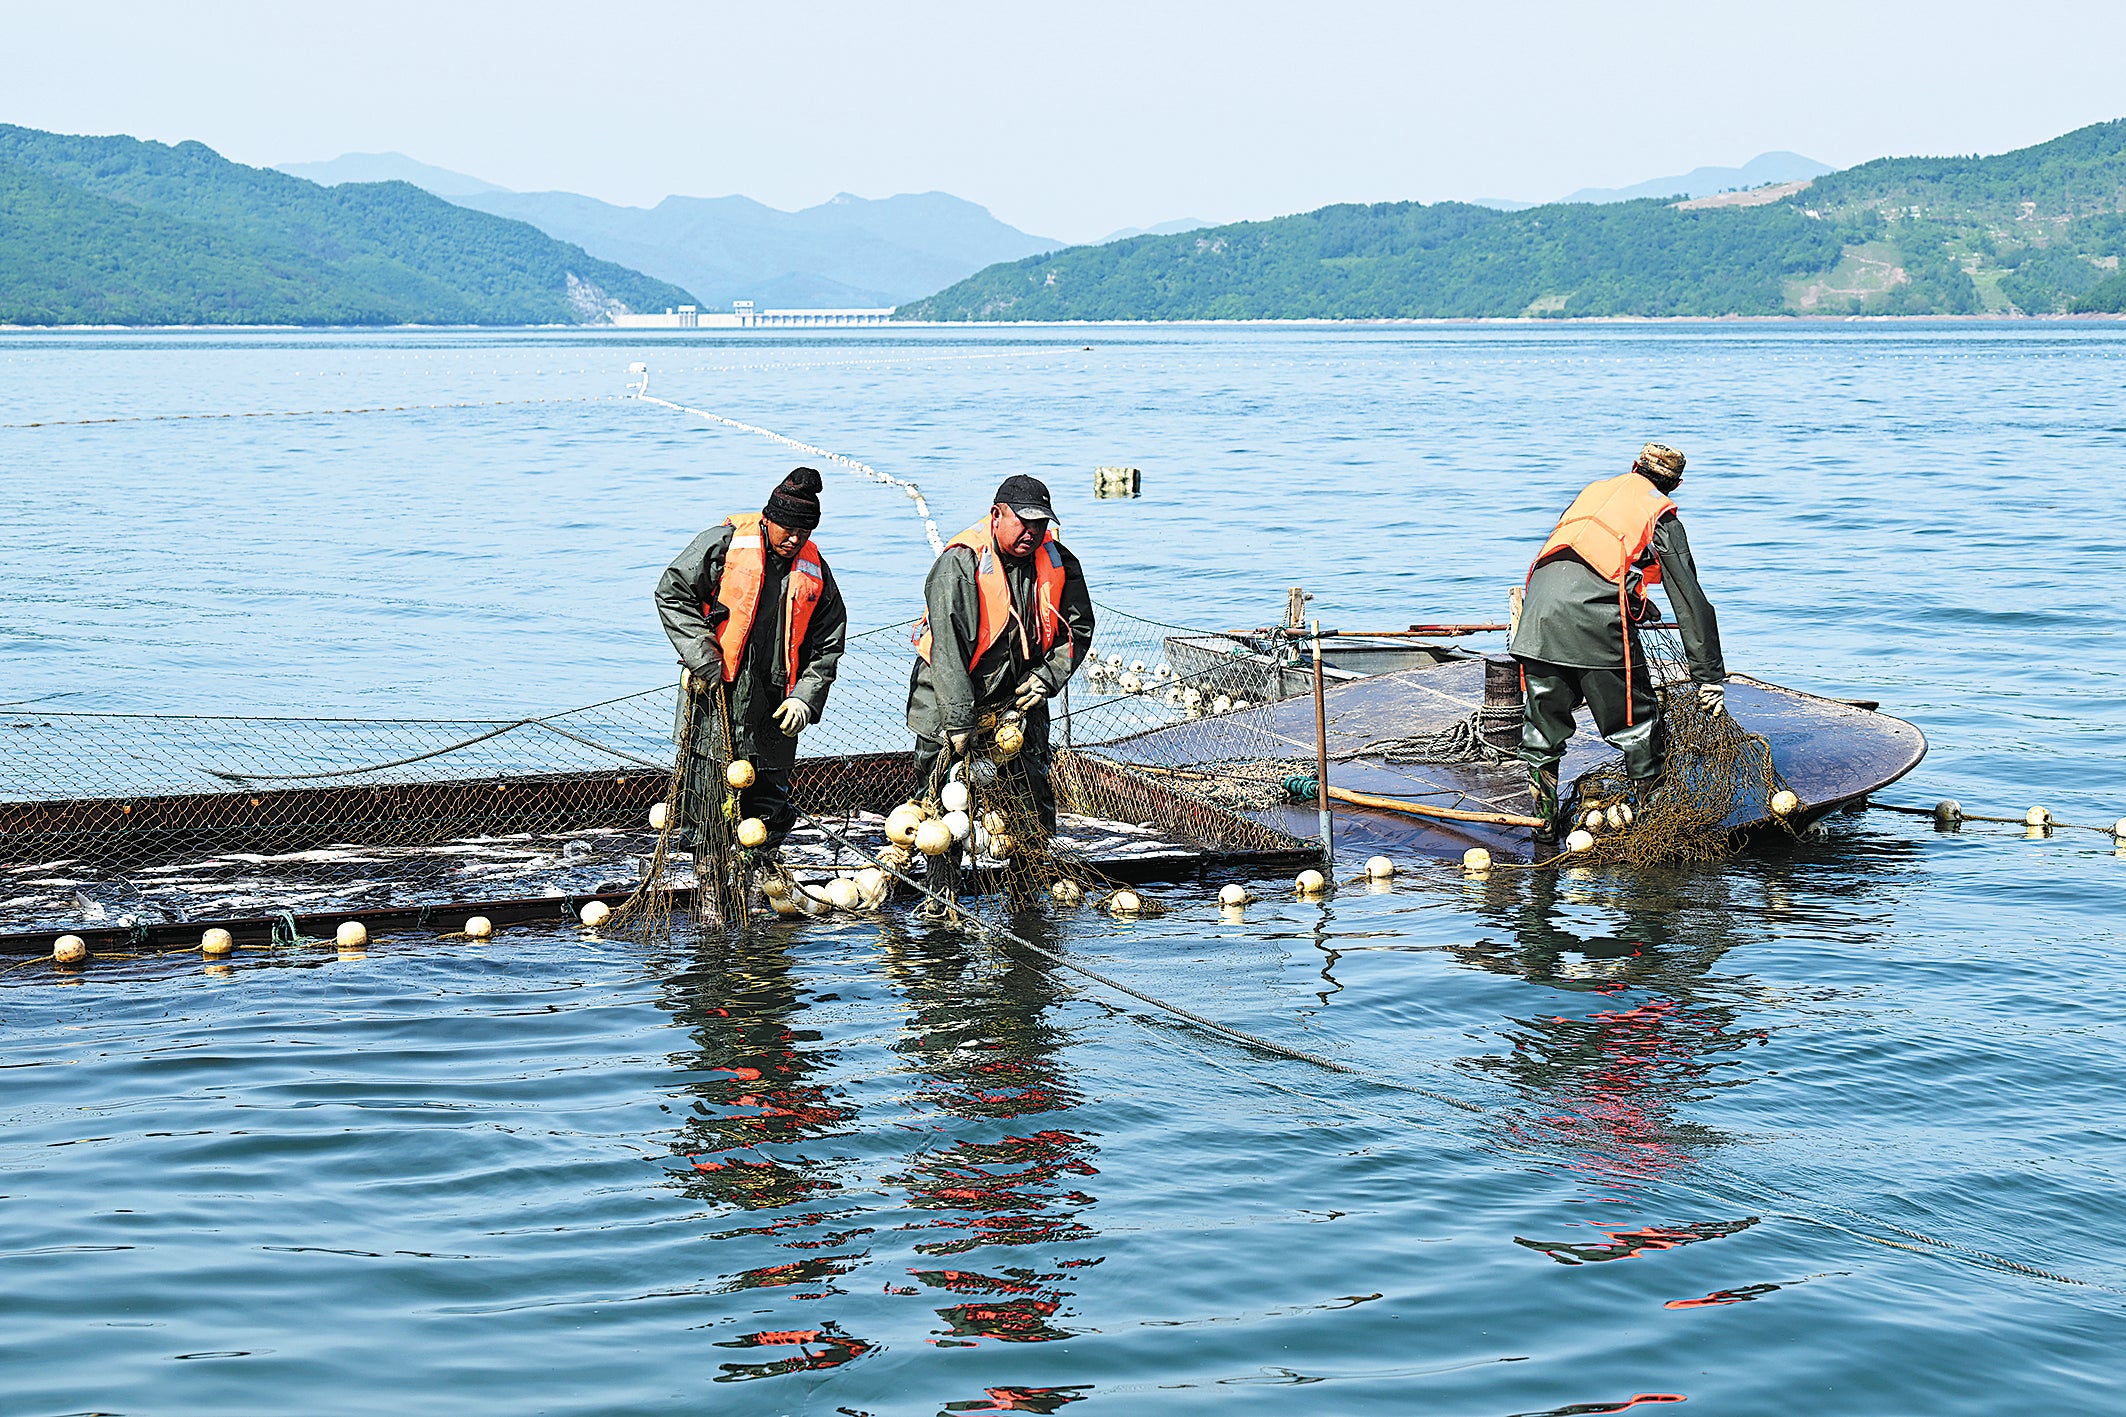 Farmed fish are netted from the Guanyinge Reservoir